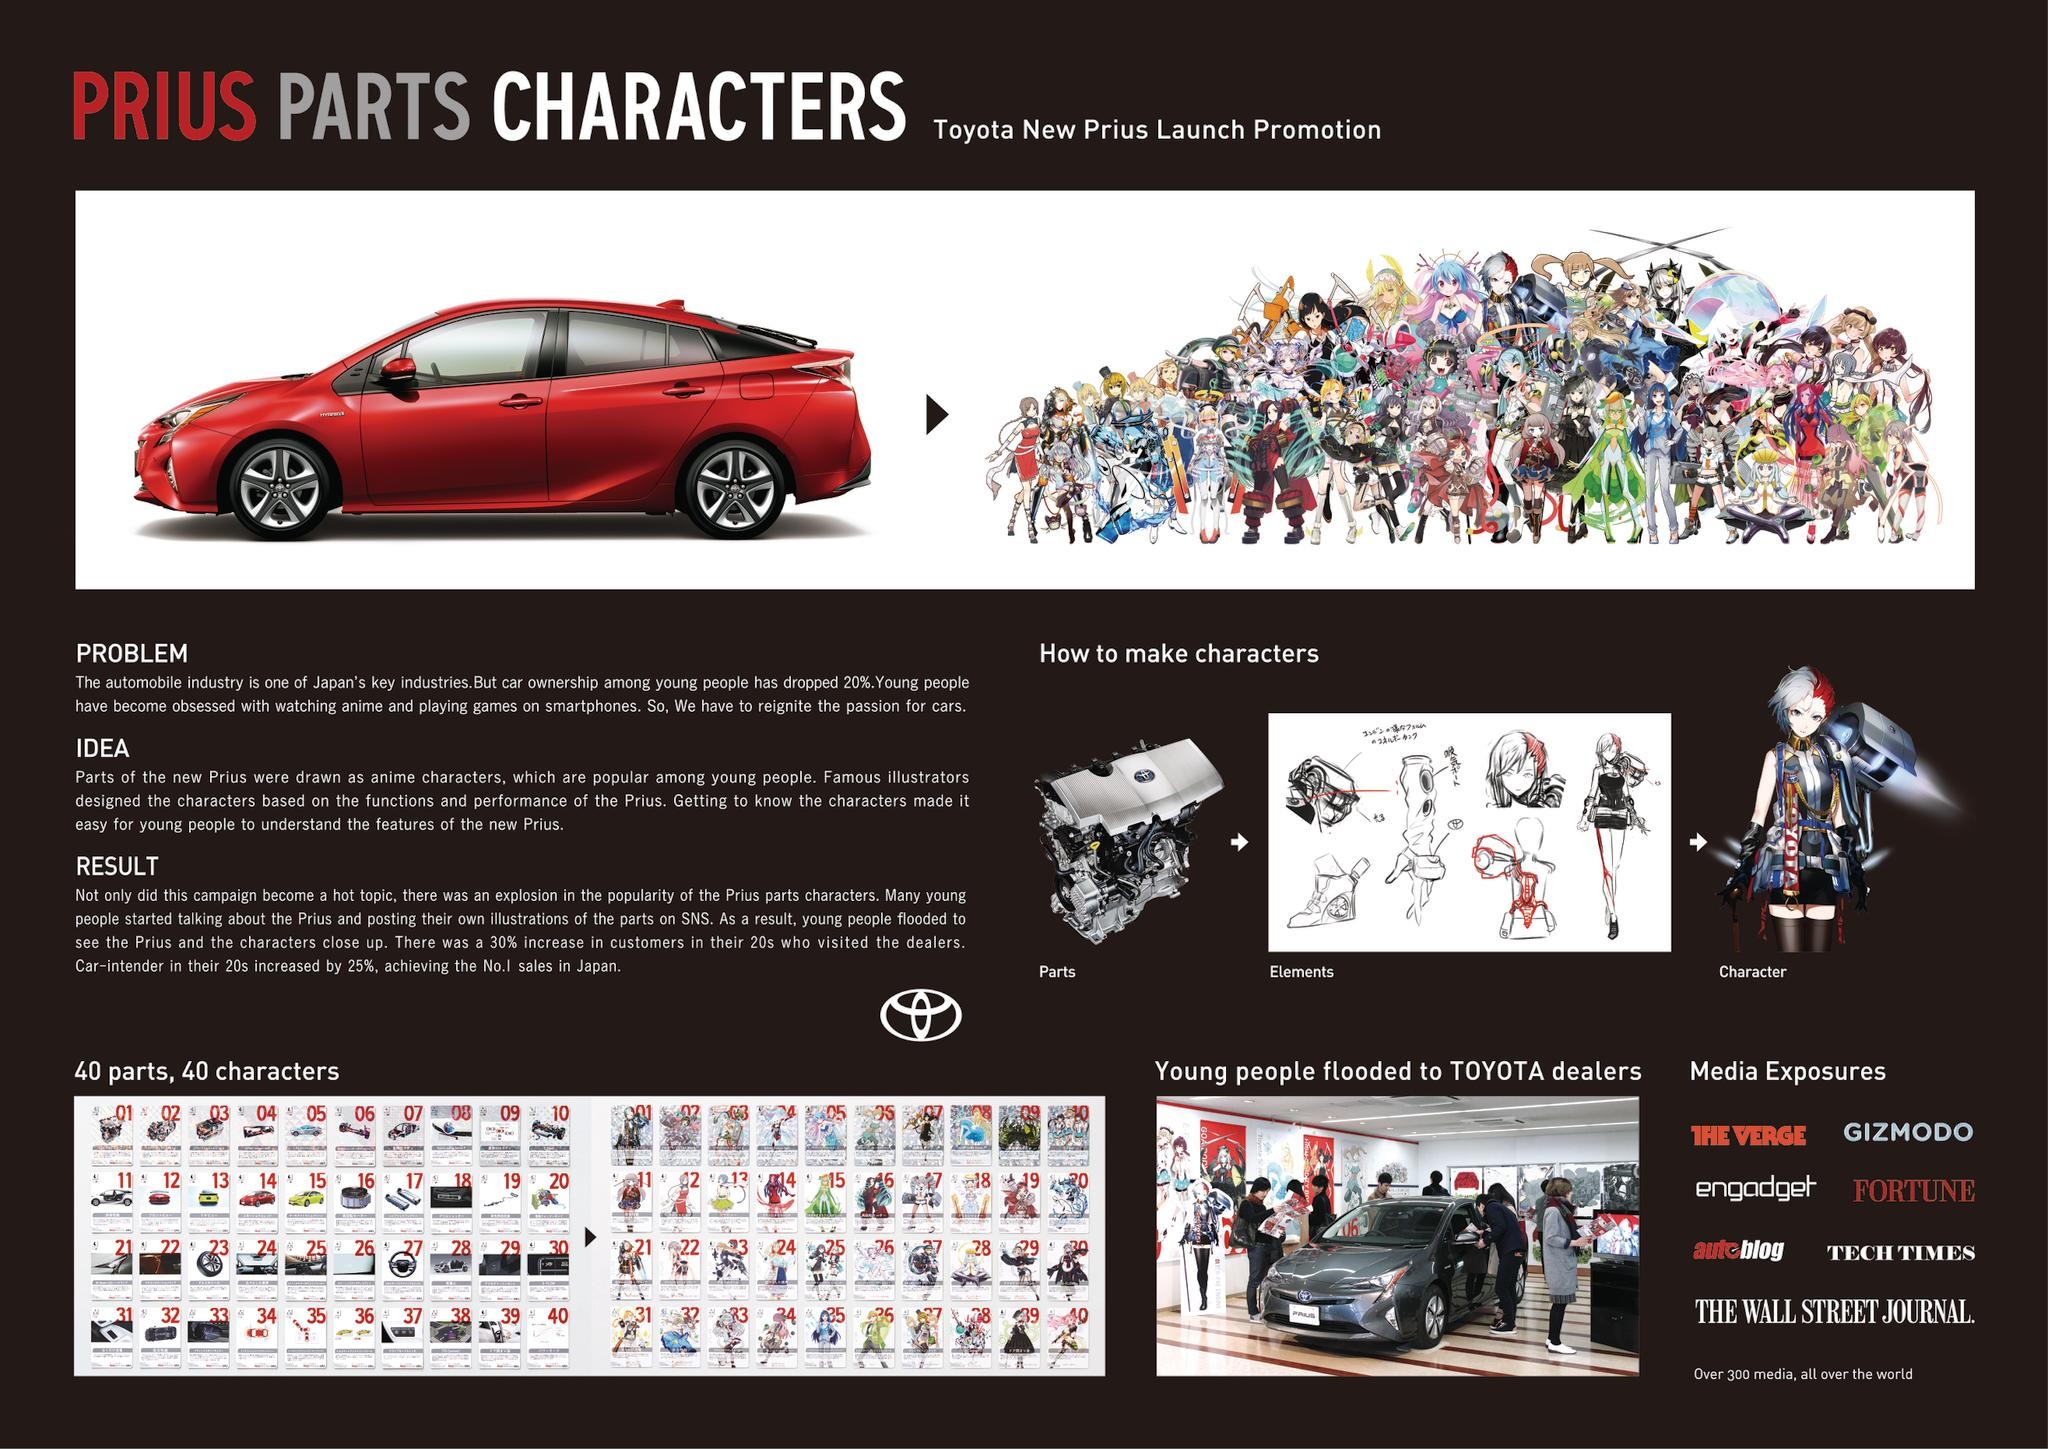 PRIUS! PARTS CHARACTERS